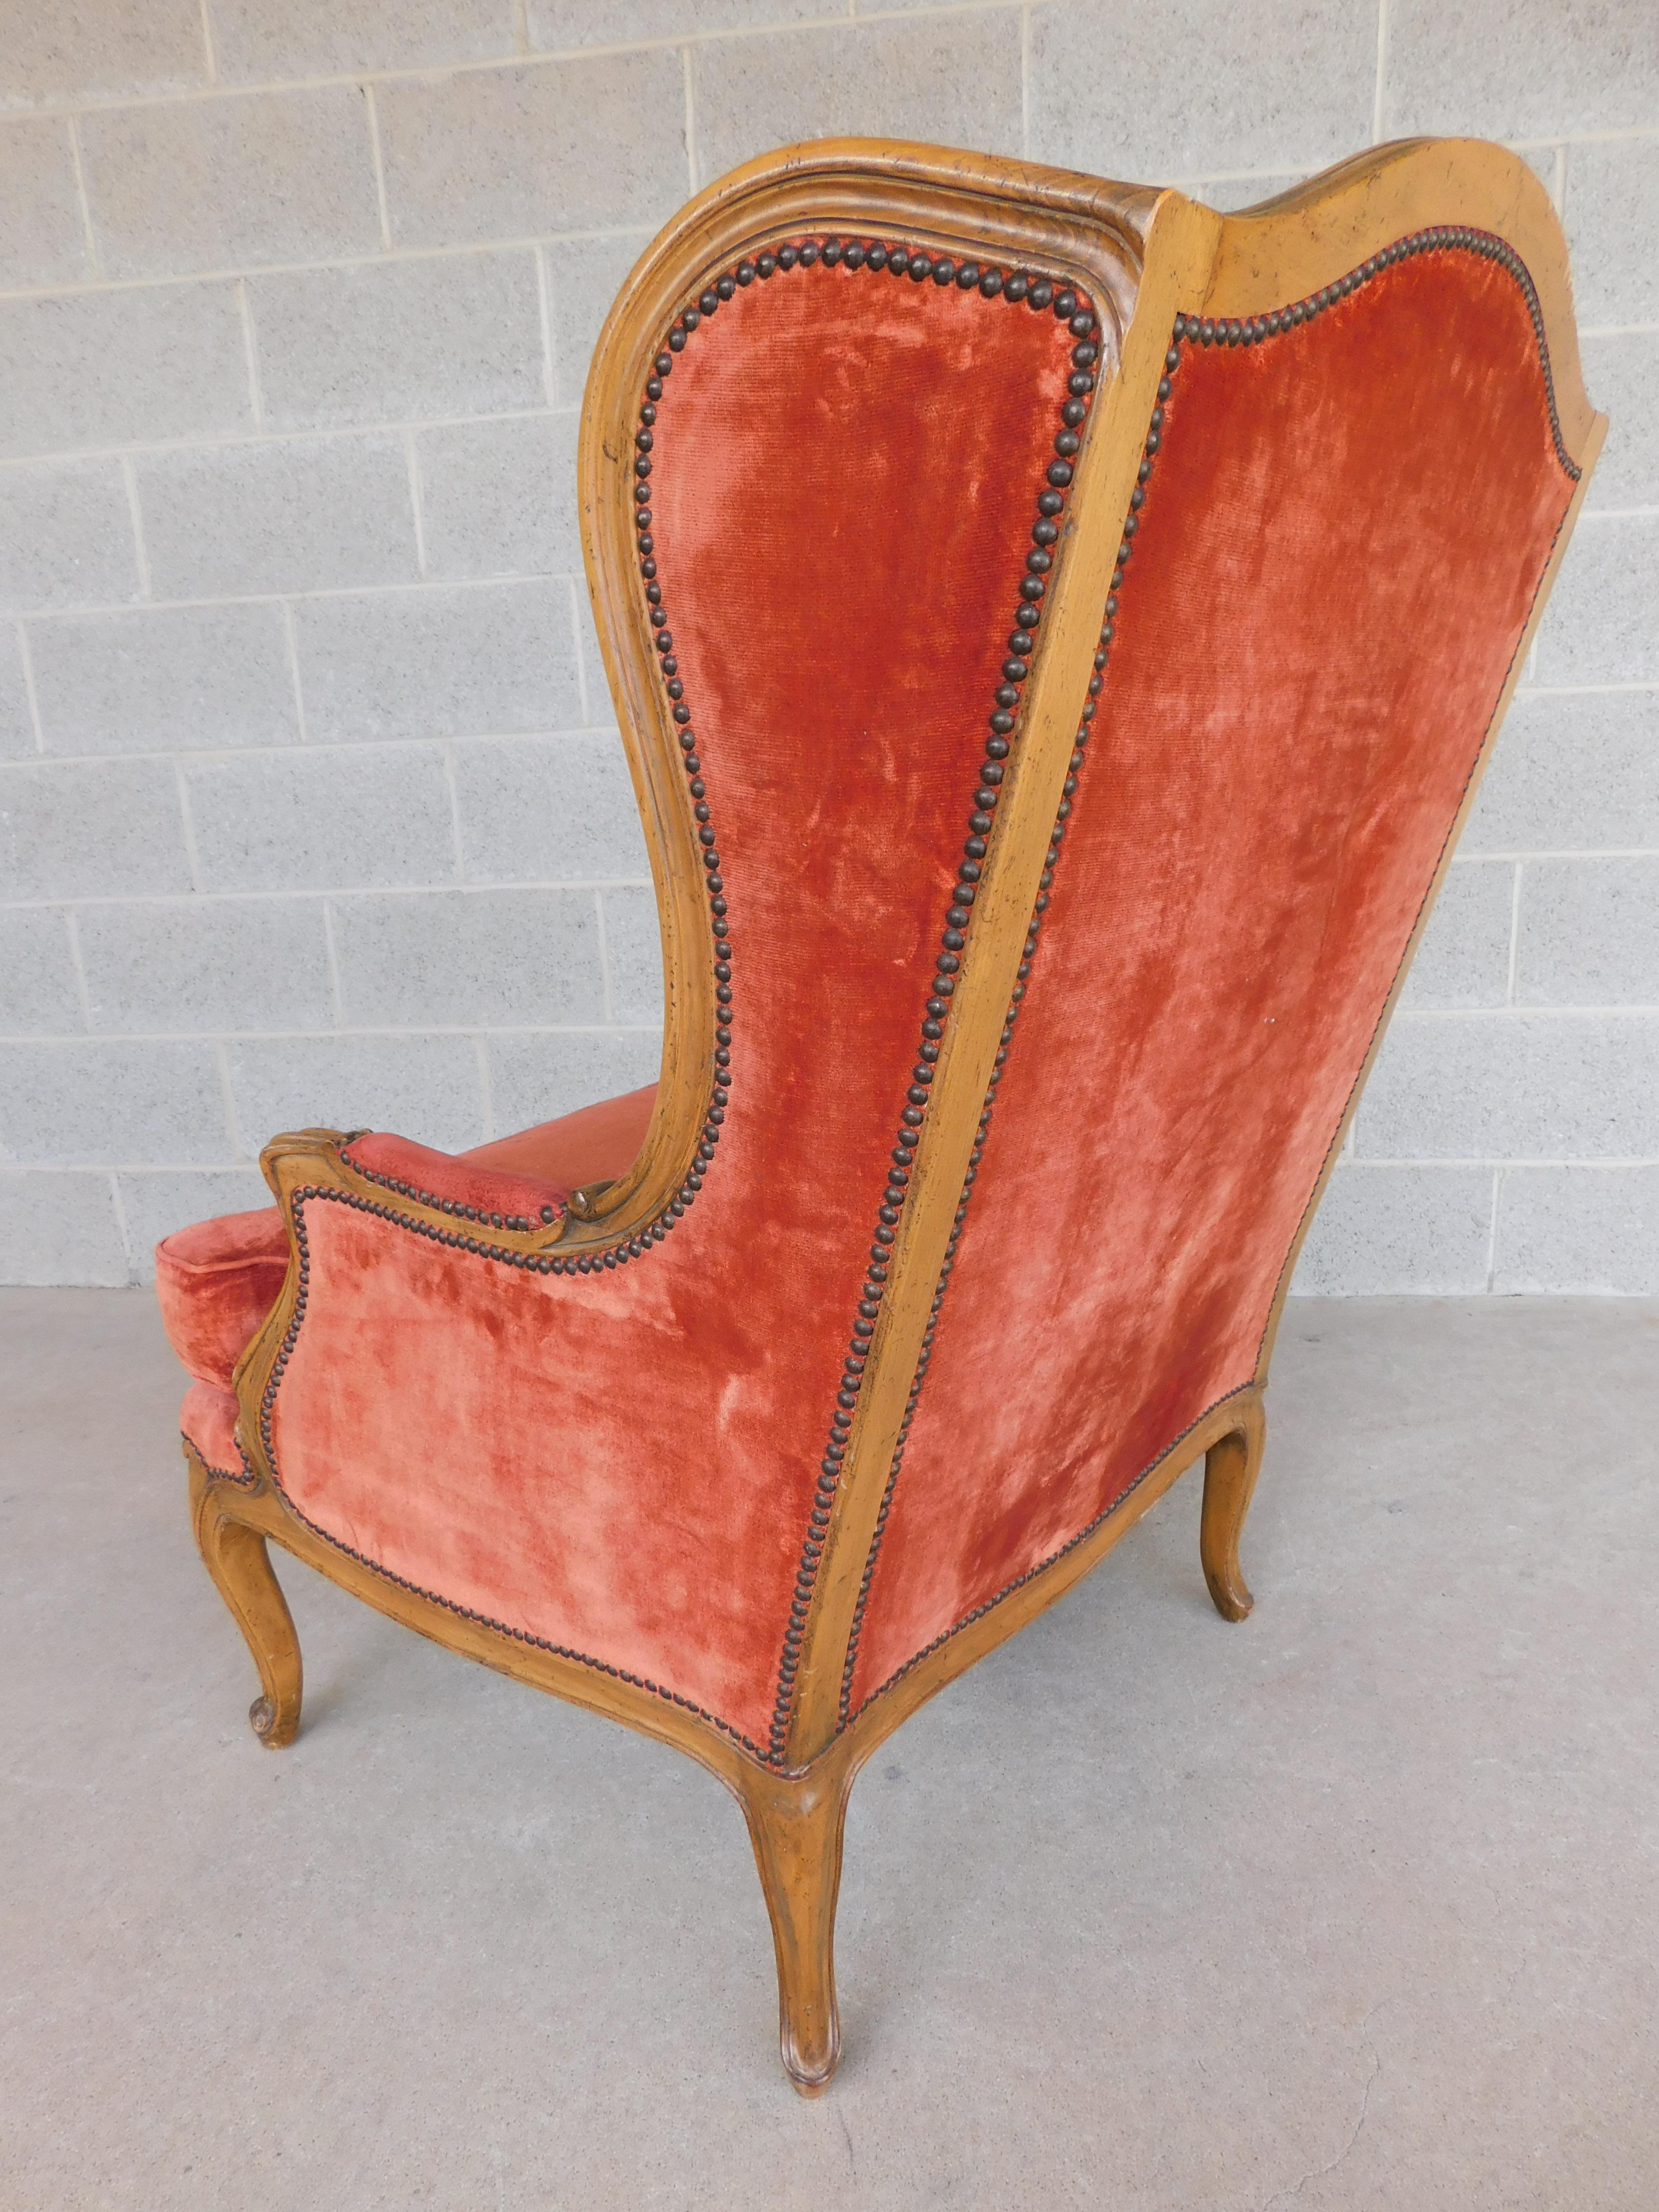 Midcentury Baker Furniture French Style Bergere Chair In Good Condition For Sale In Parkesburg, PA